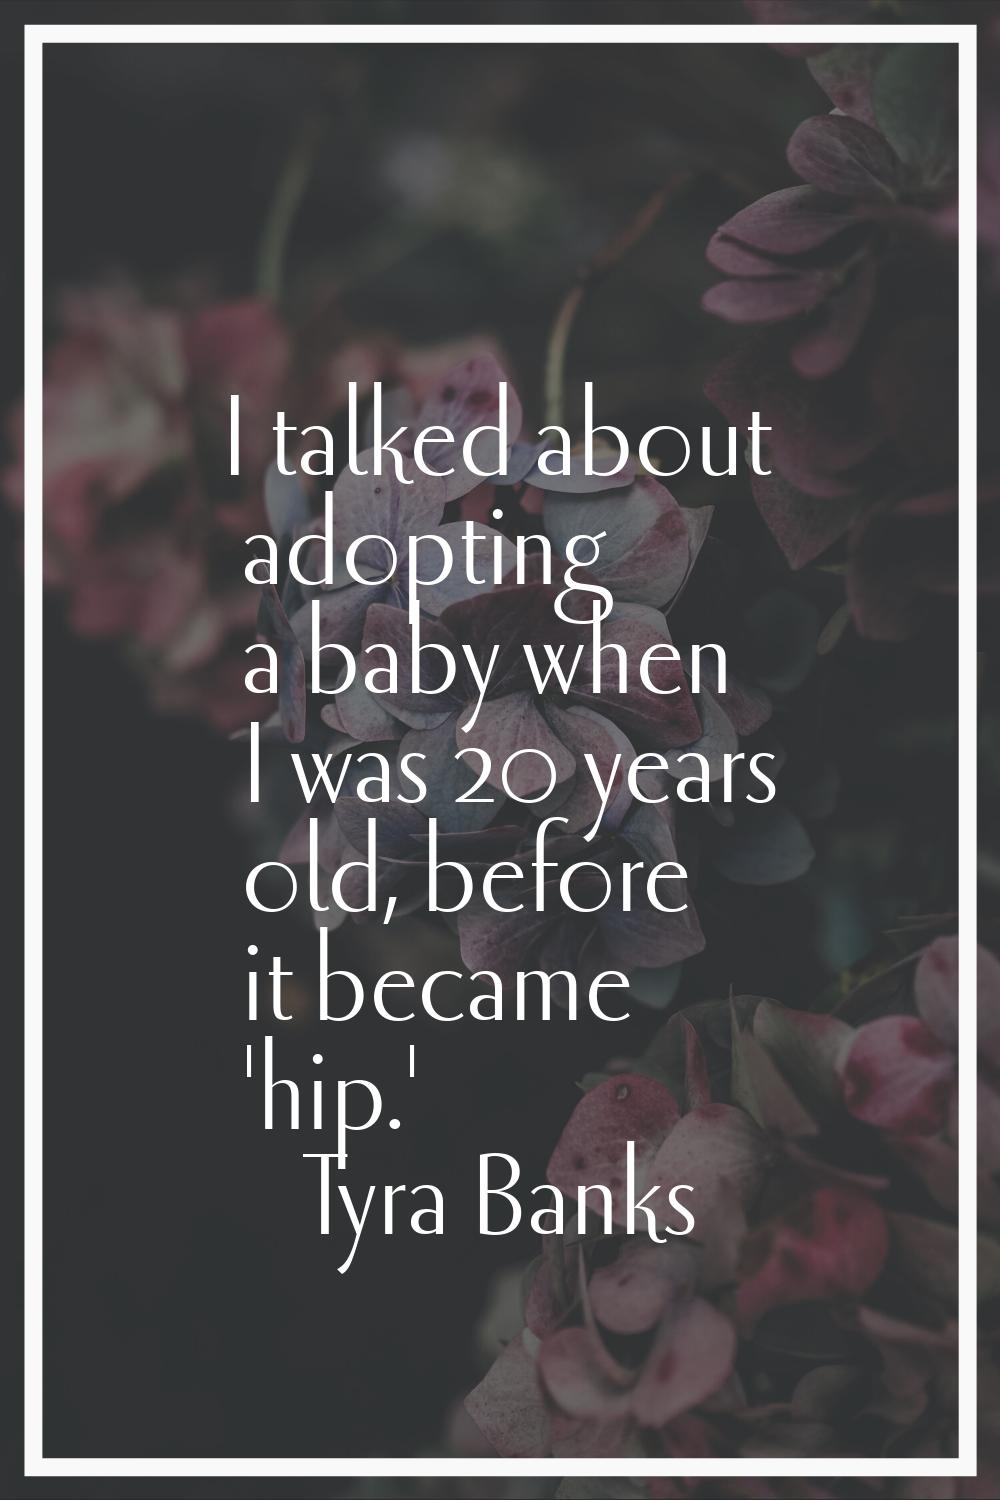 I talked about adopting a baby when I was 20 years old, before it became 'hip.'